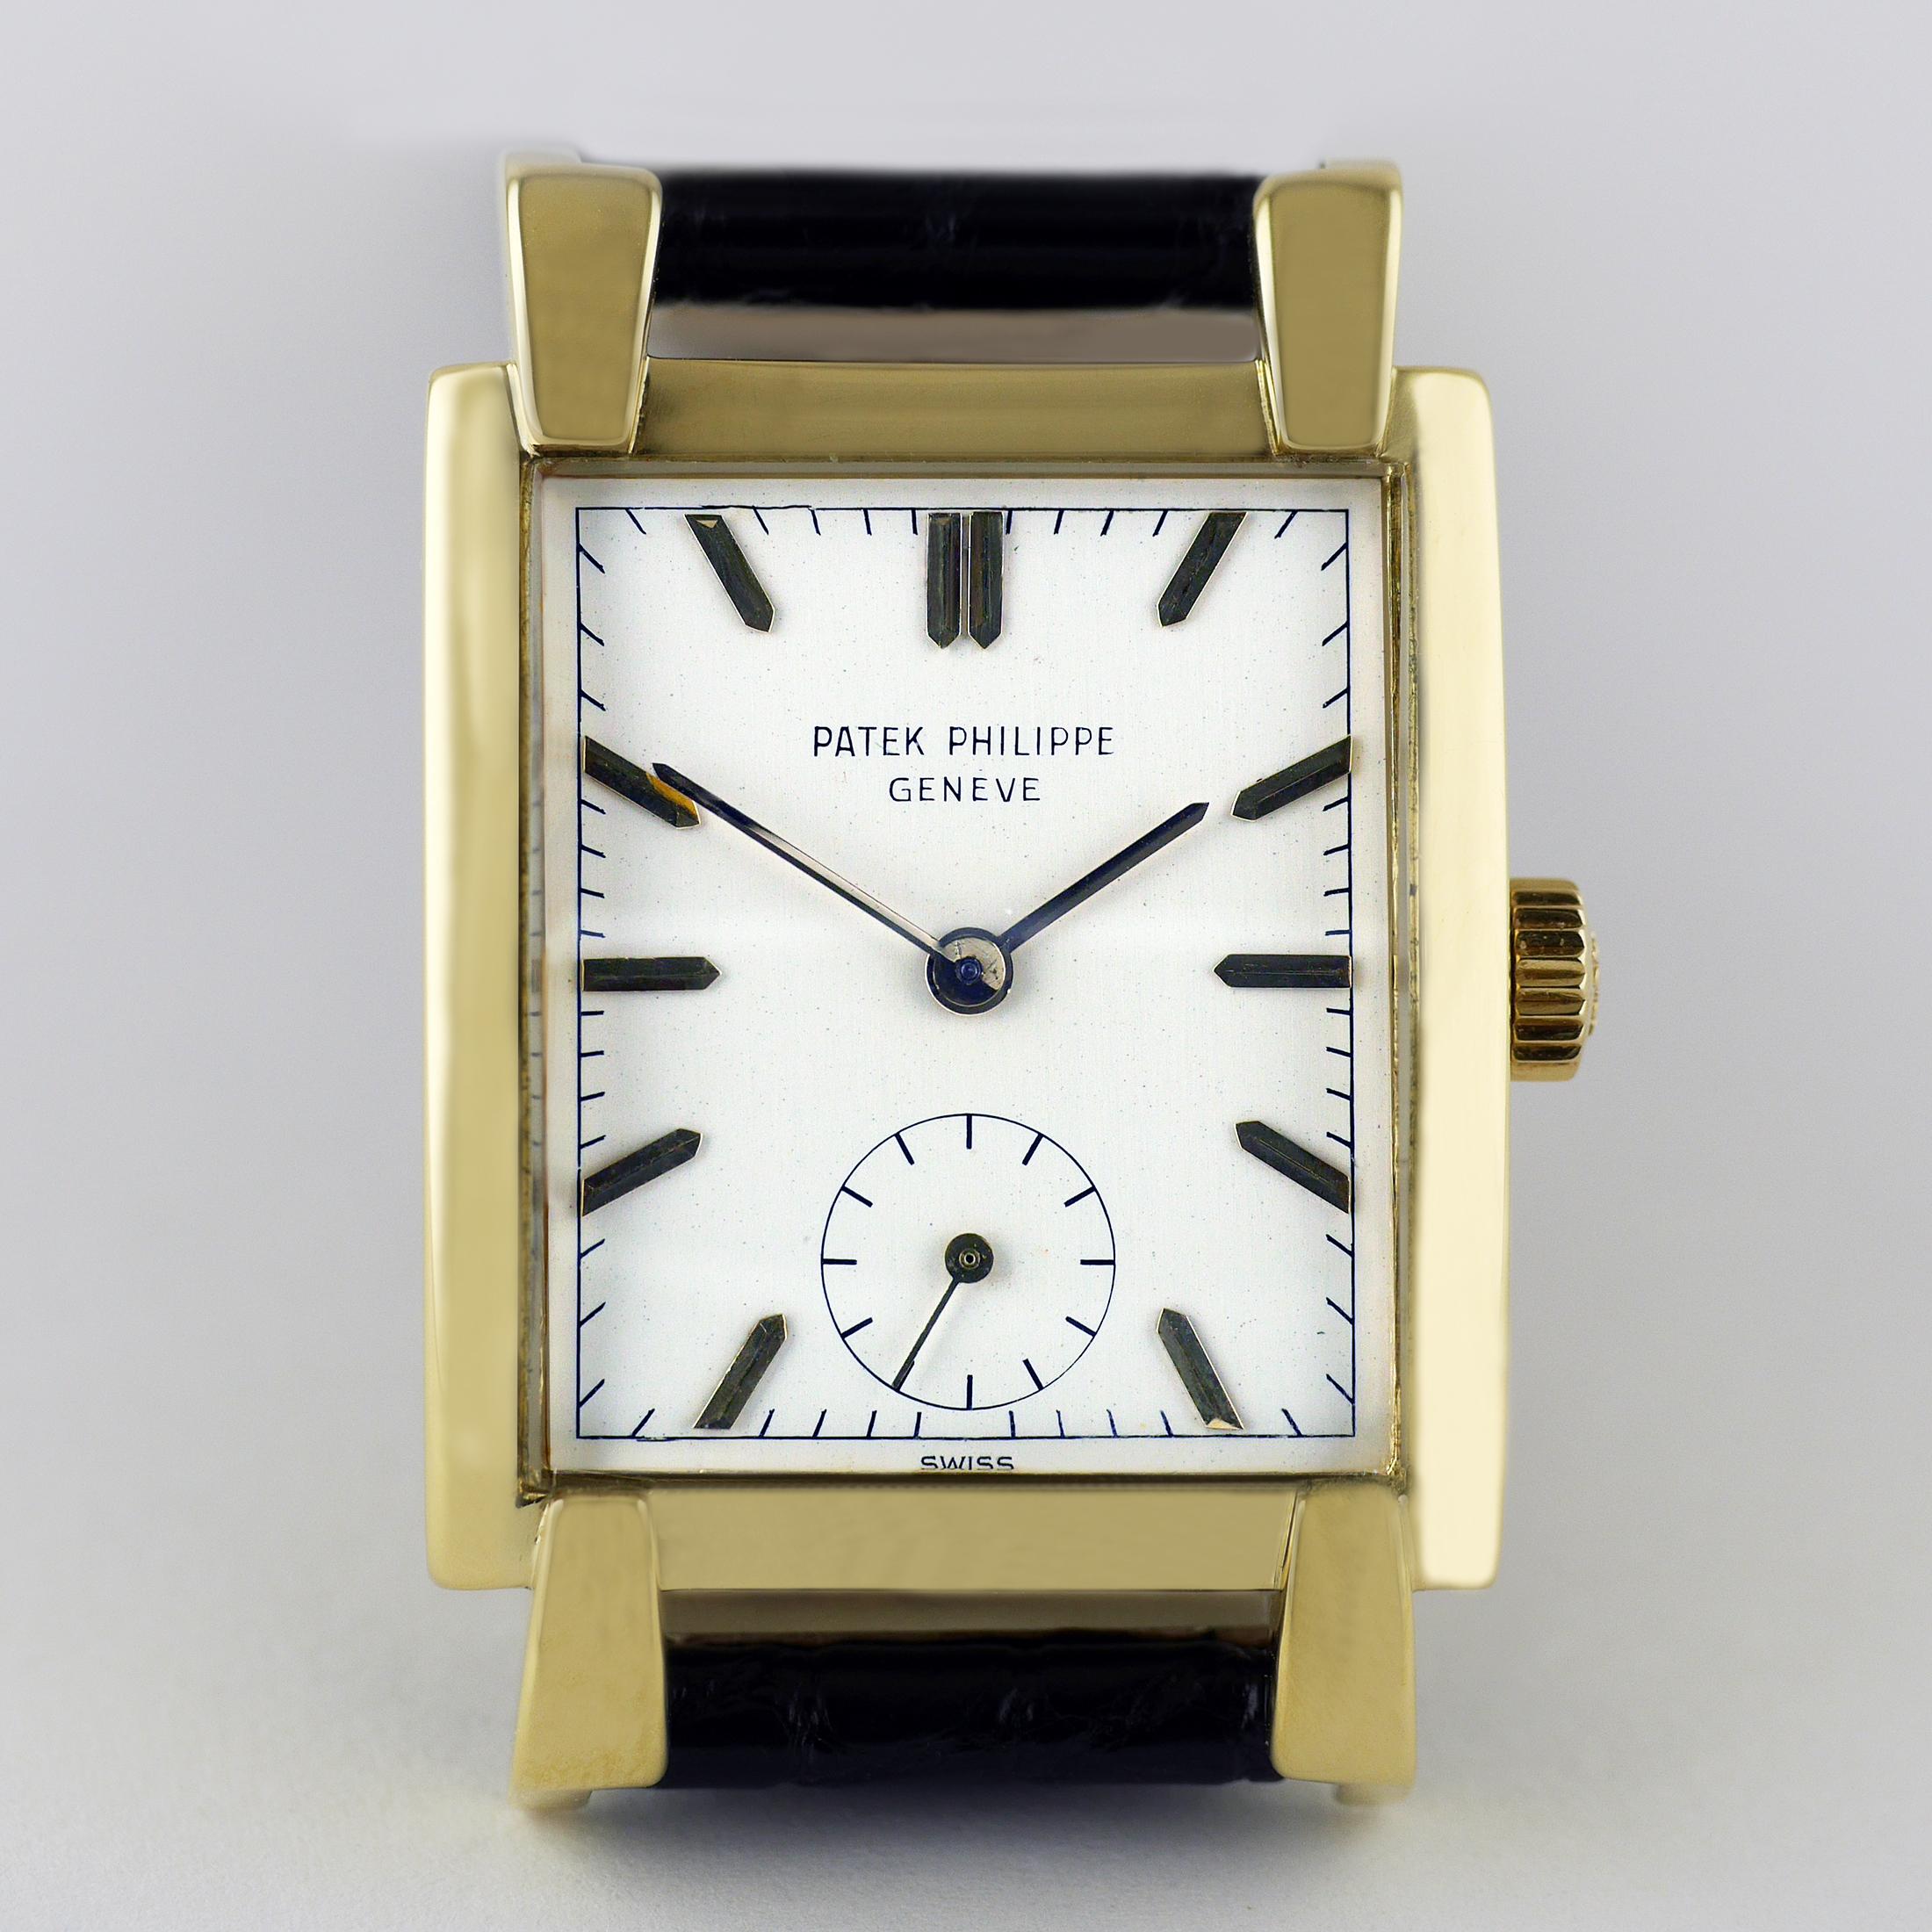 An elegant, fine and rare vintage wristwatch by Patek Philippe made in 1951.

The 18 carat rectangular shaped case in yellow gold with unusual overlaid, inverse, tapered lugs.

Jewelled, 9’’’90 calibre manual movement. 18 jewels, straight line lever